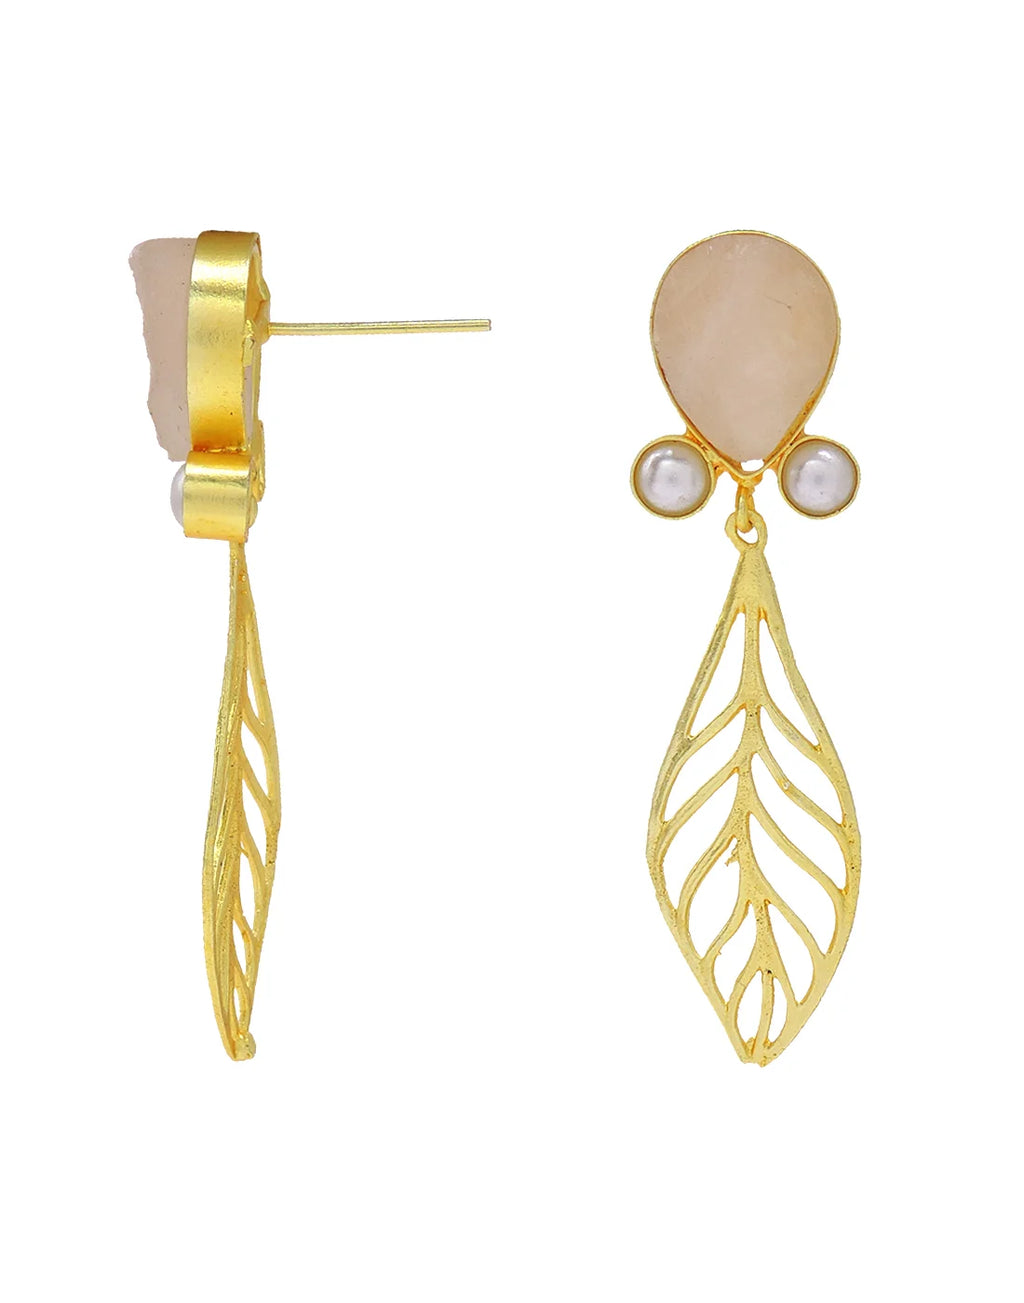 Rose Leaf Earrings- Handcrafted Jewellery from Dori